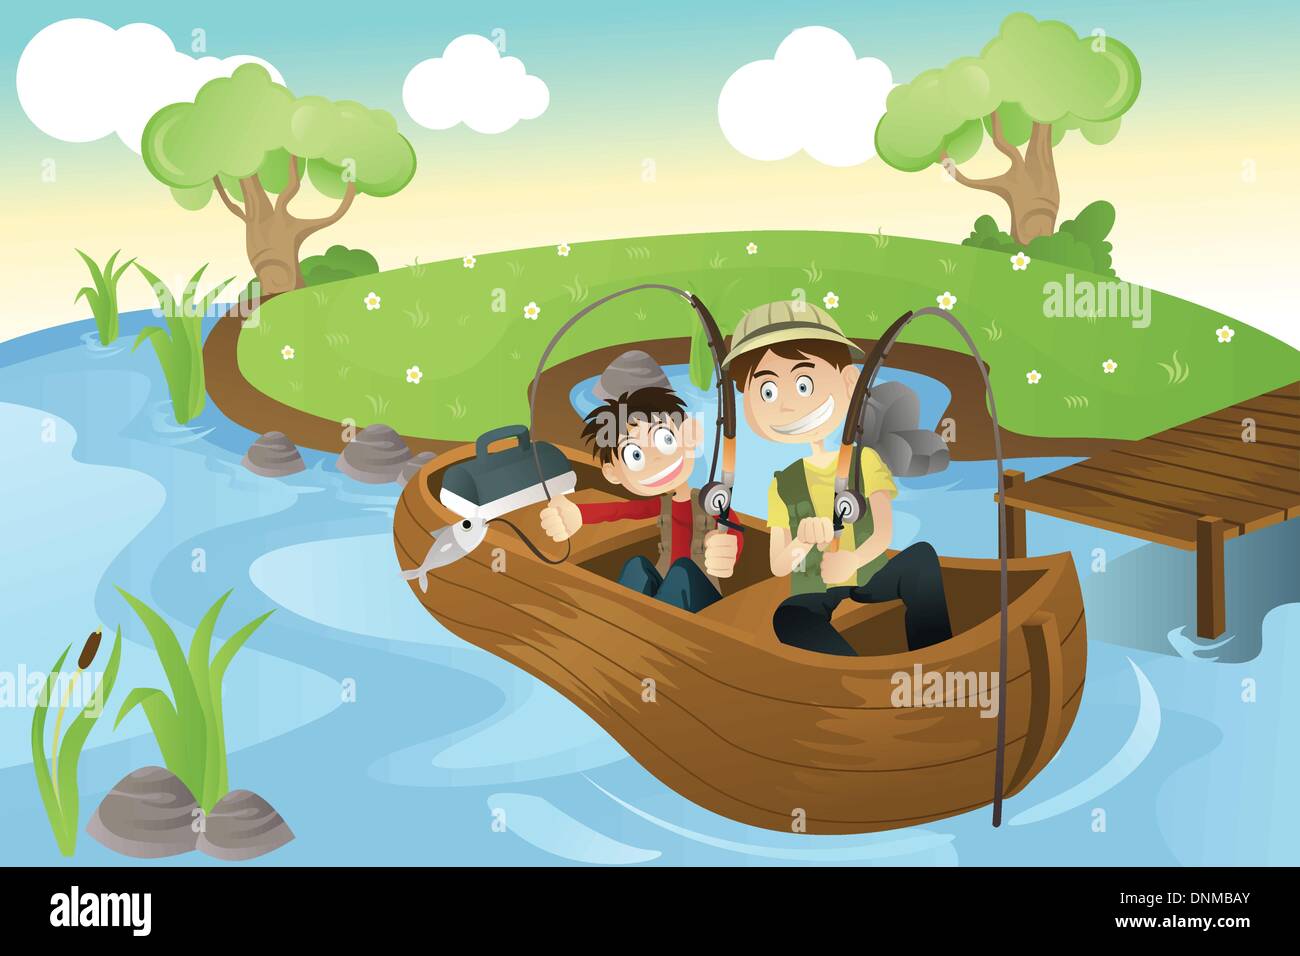 https://c8.alamy.com/comp/DNMBAY/a-vector-illustration-of-a-father-and-a-son-going-fishing-in-the-lake-DNMBAY.jpg